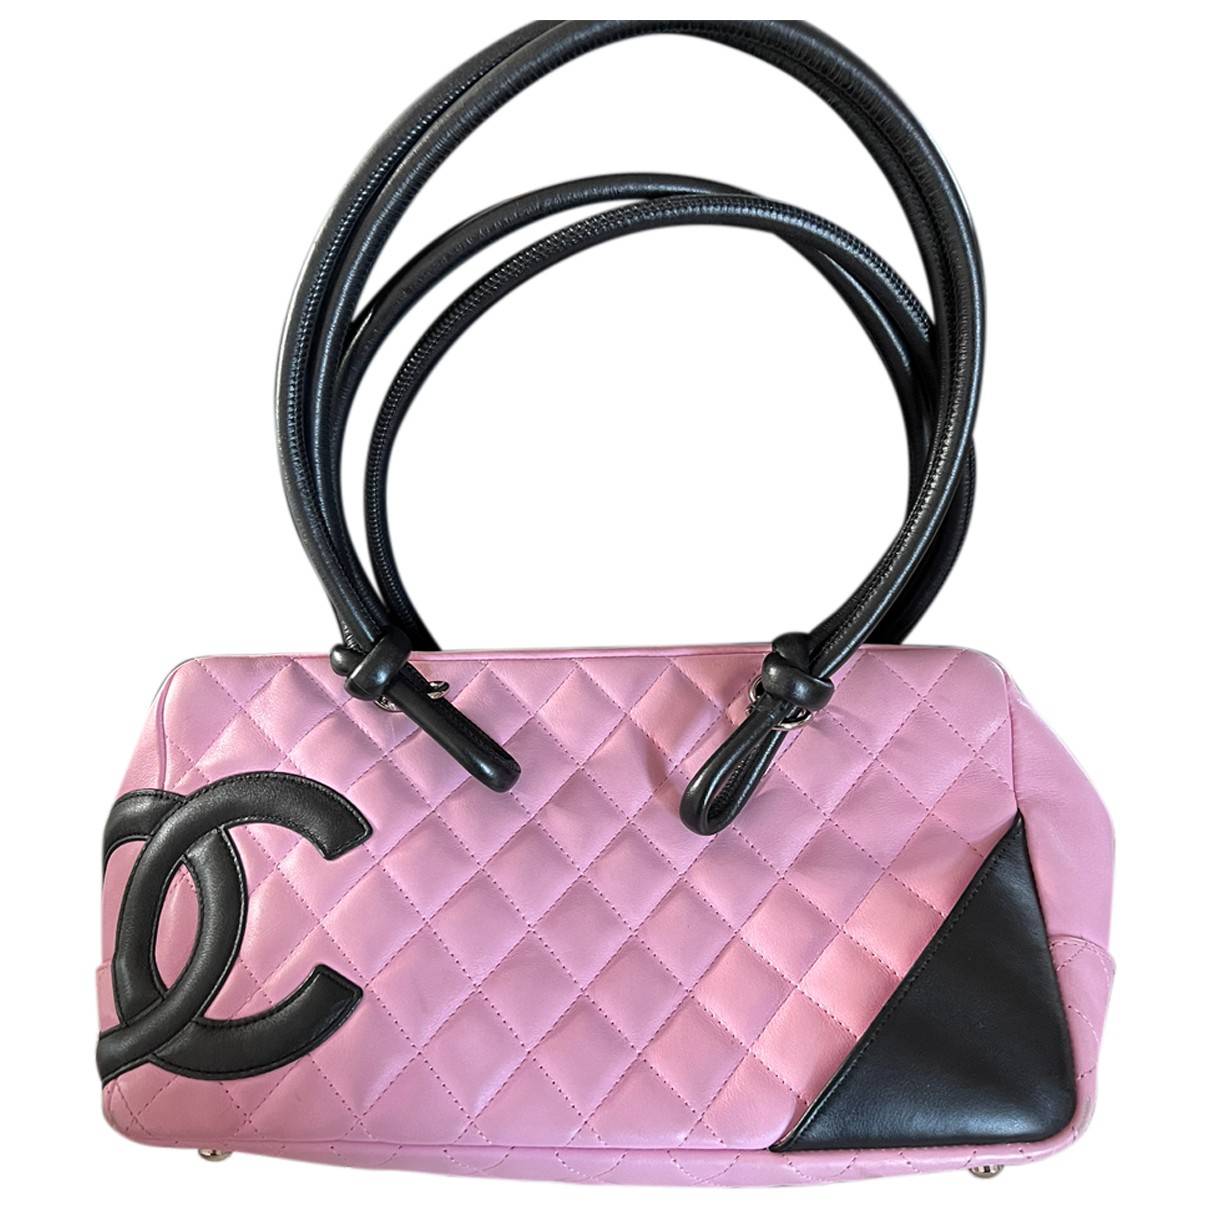 Chanel Pink/Black Quilted Leather Ligne Cambon Reporter Bag Chanel